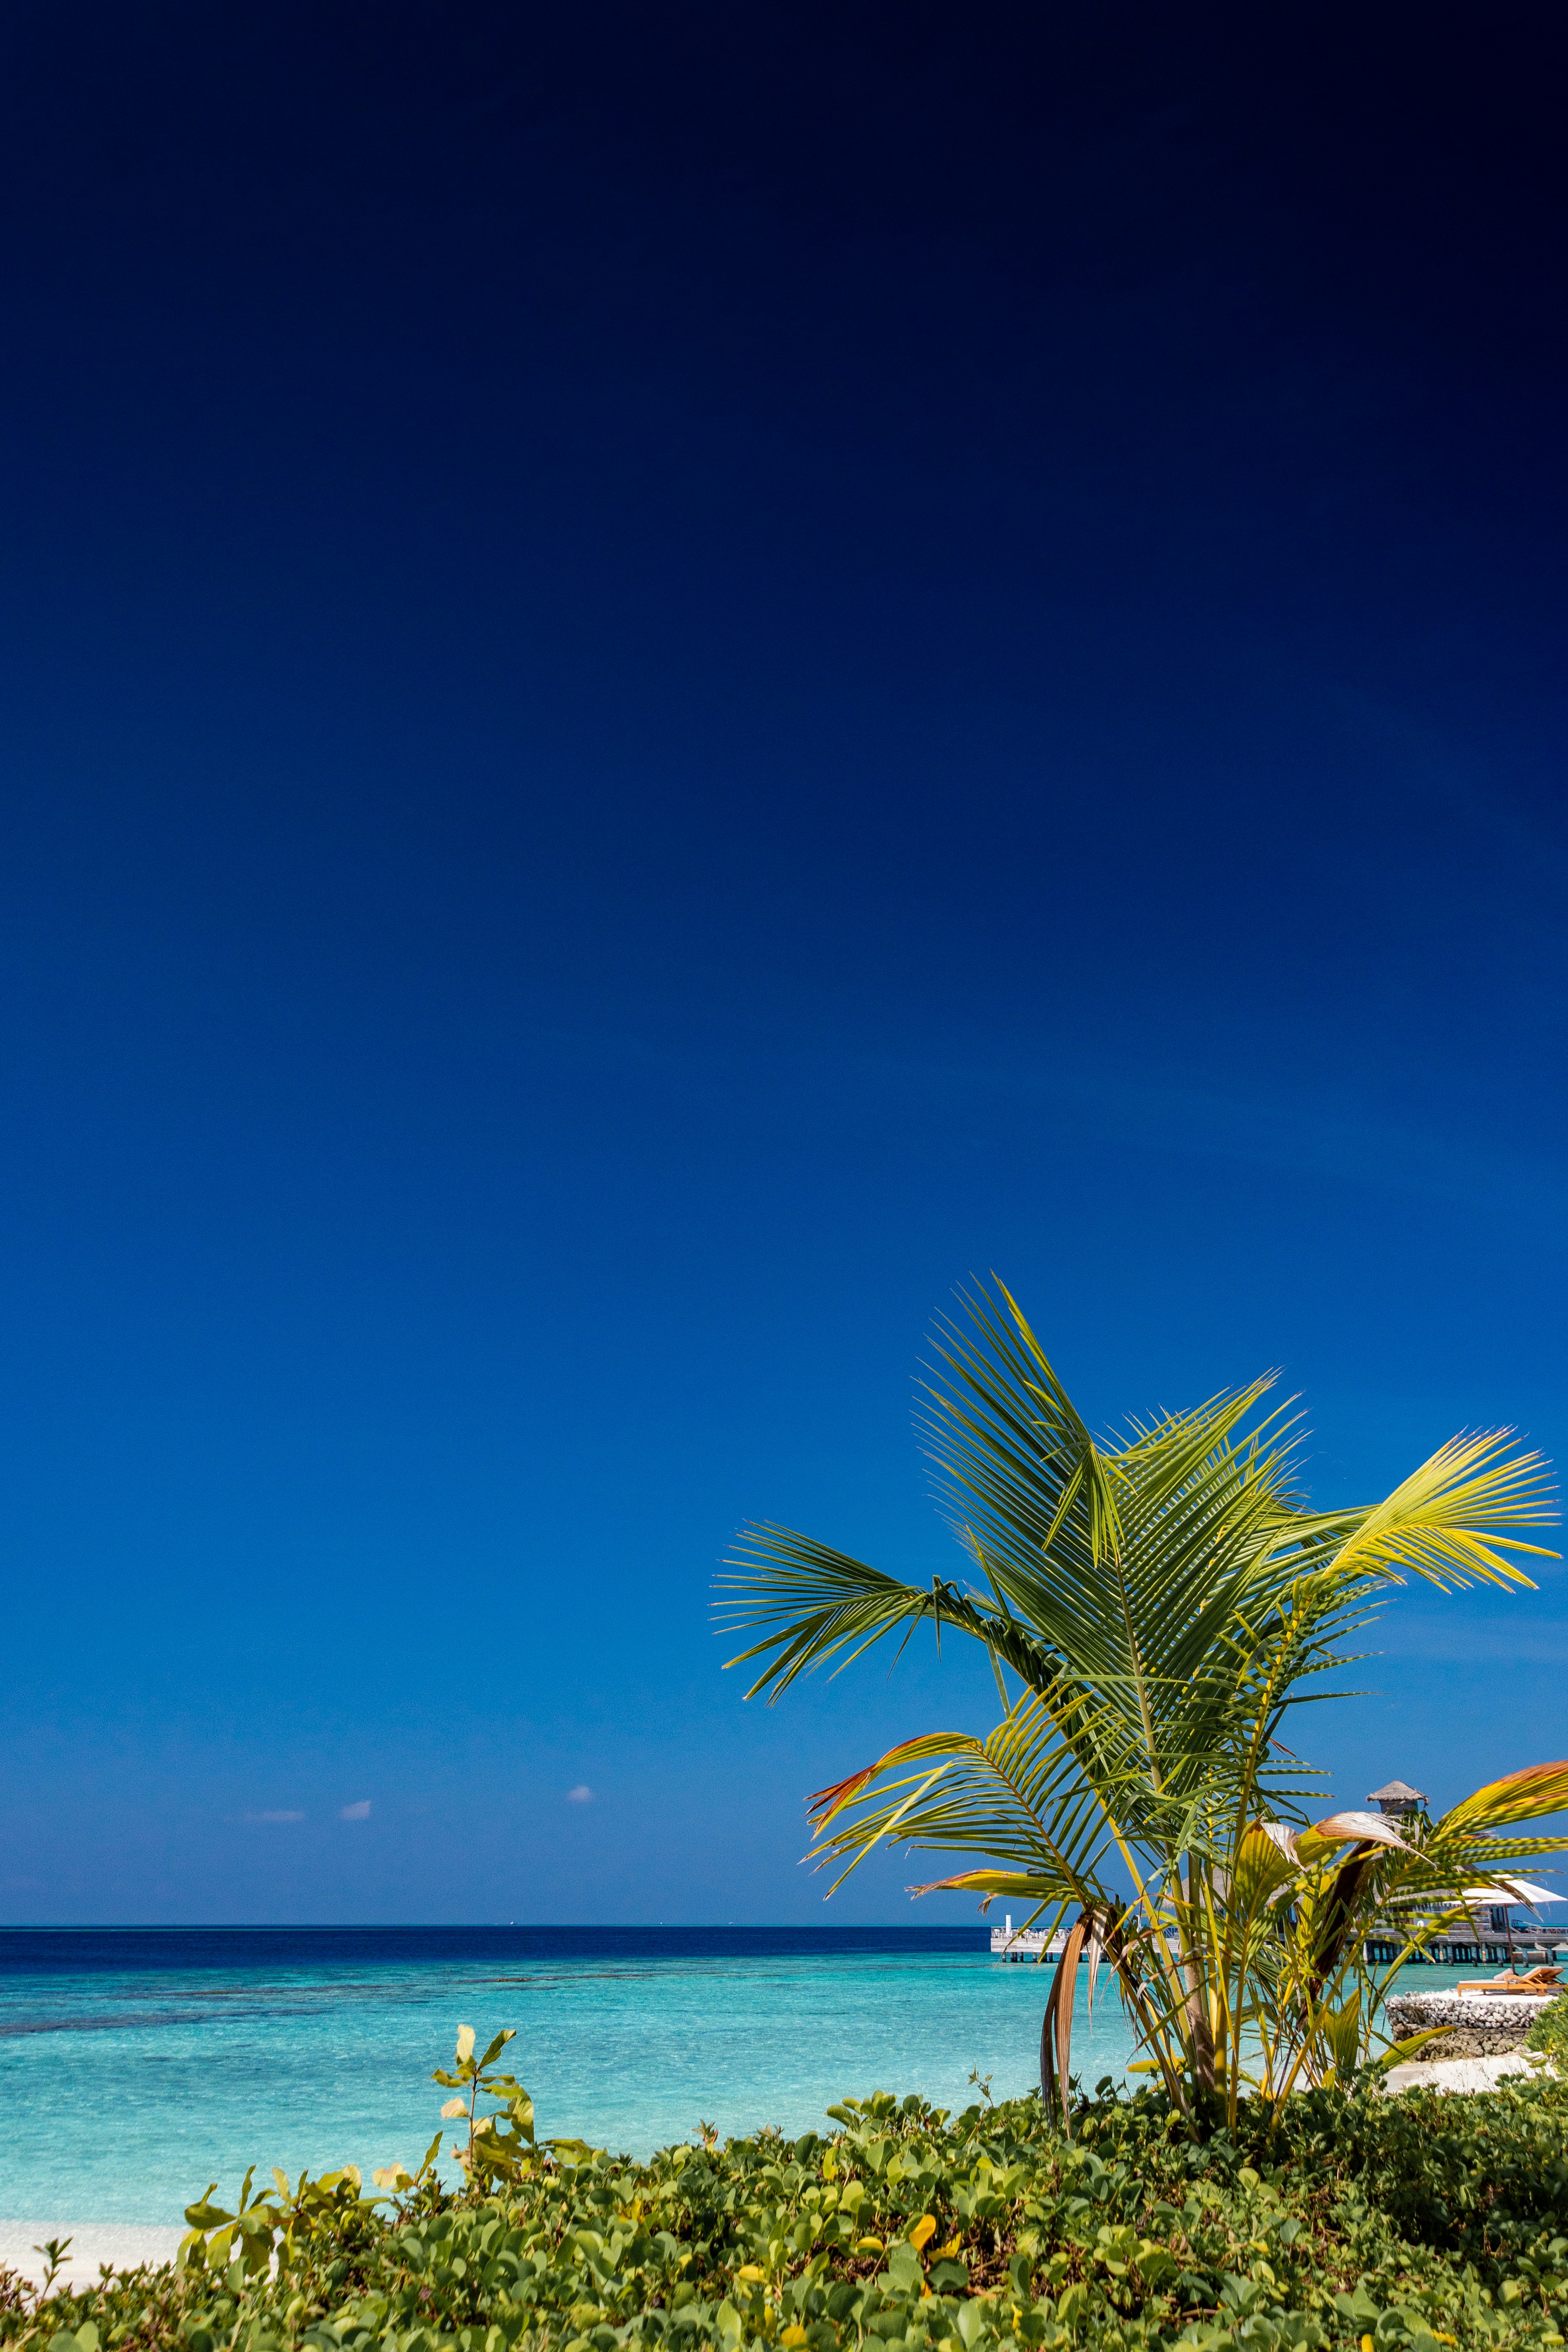 green palm tree near sea under blue sky during daytime